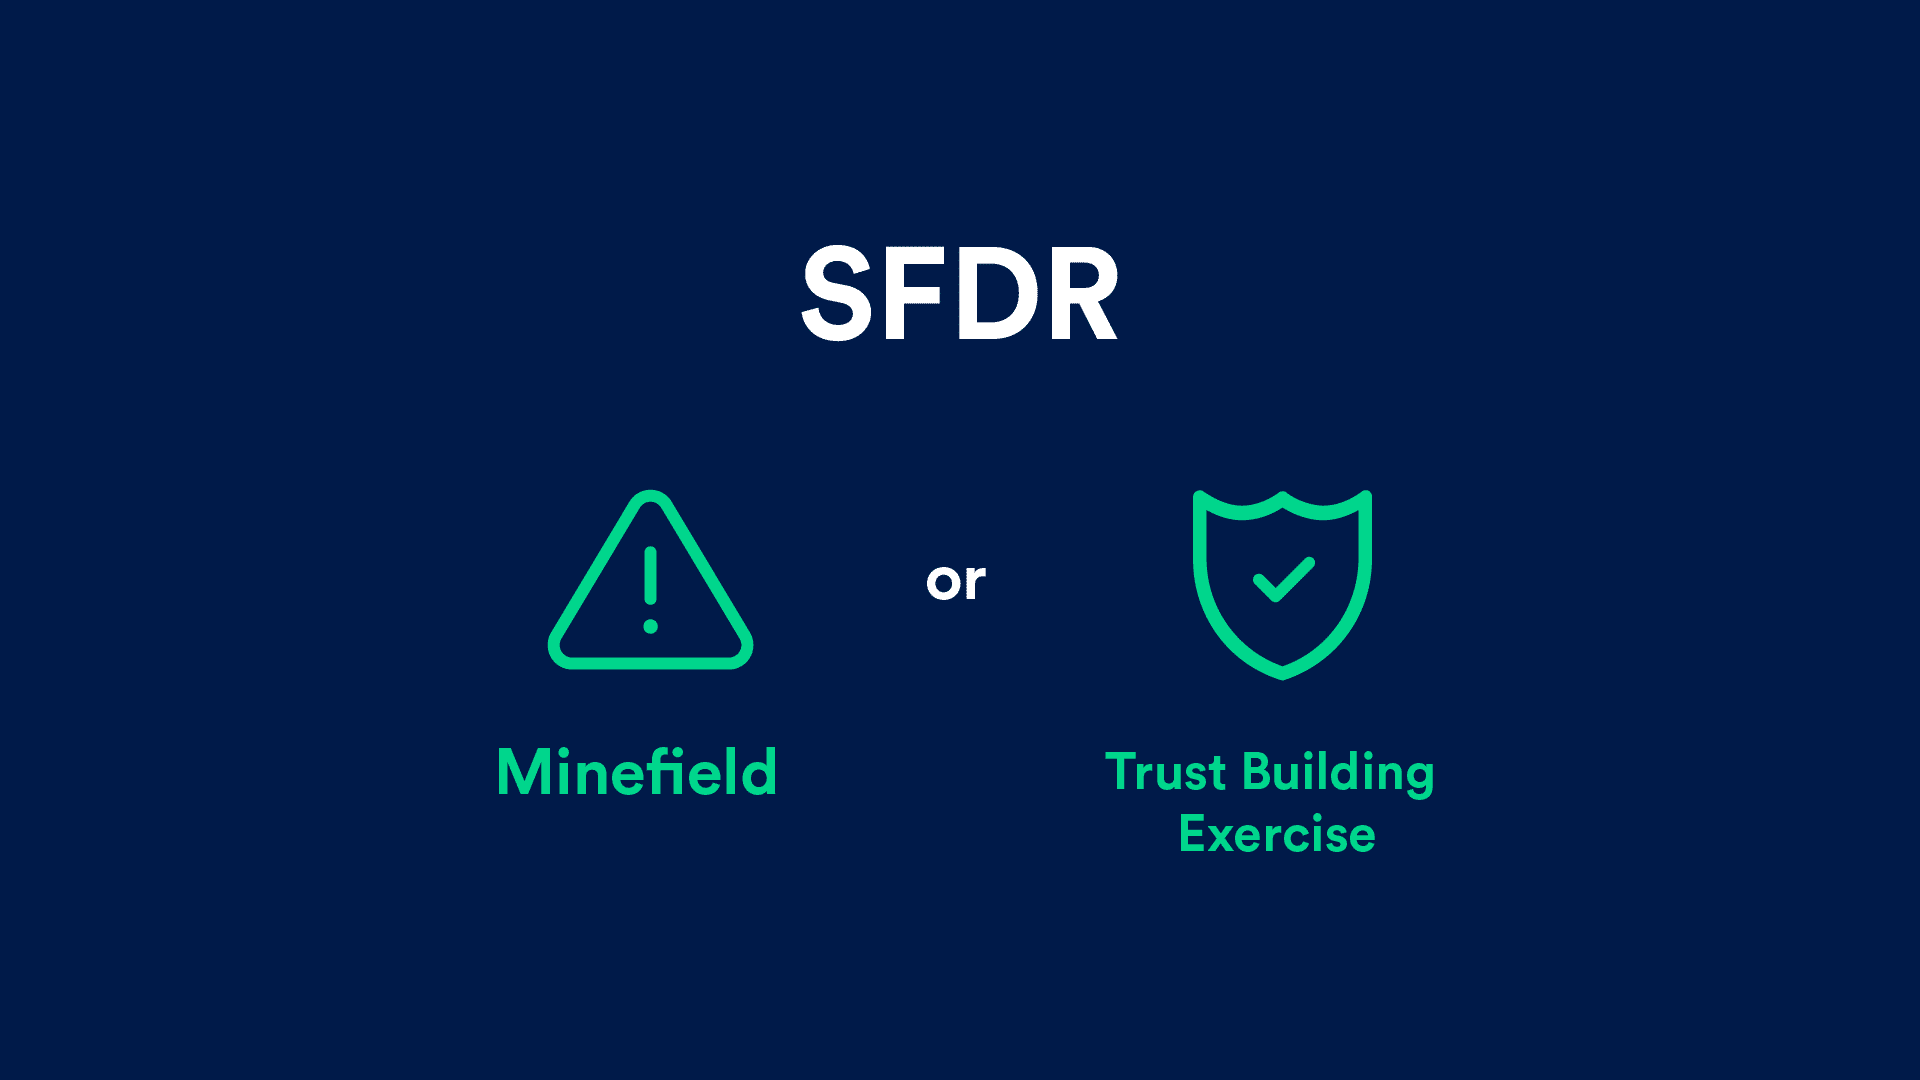 SFDR: A minefield or a trust building exercise?